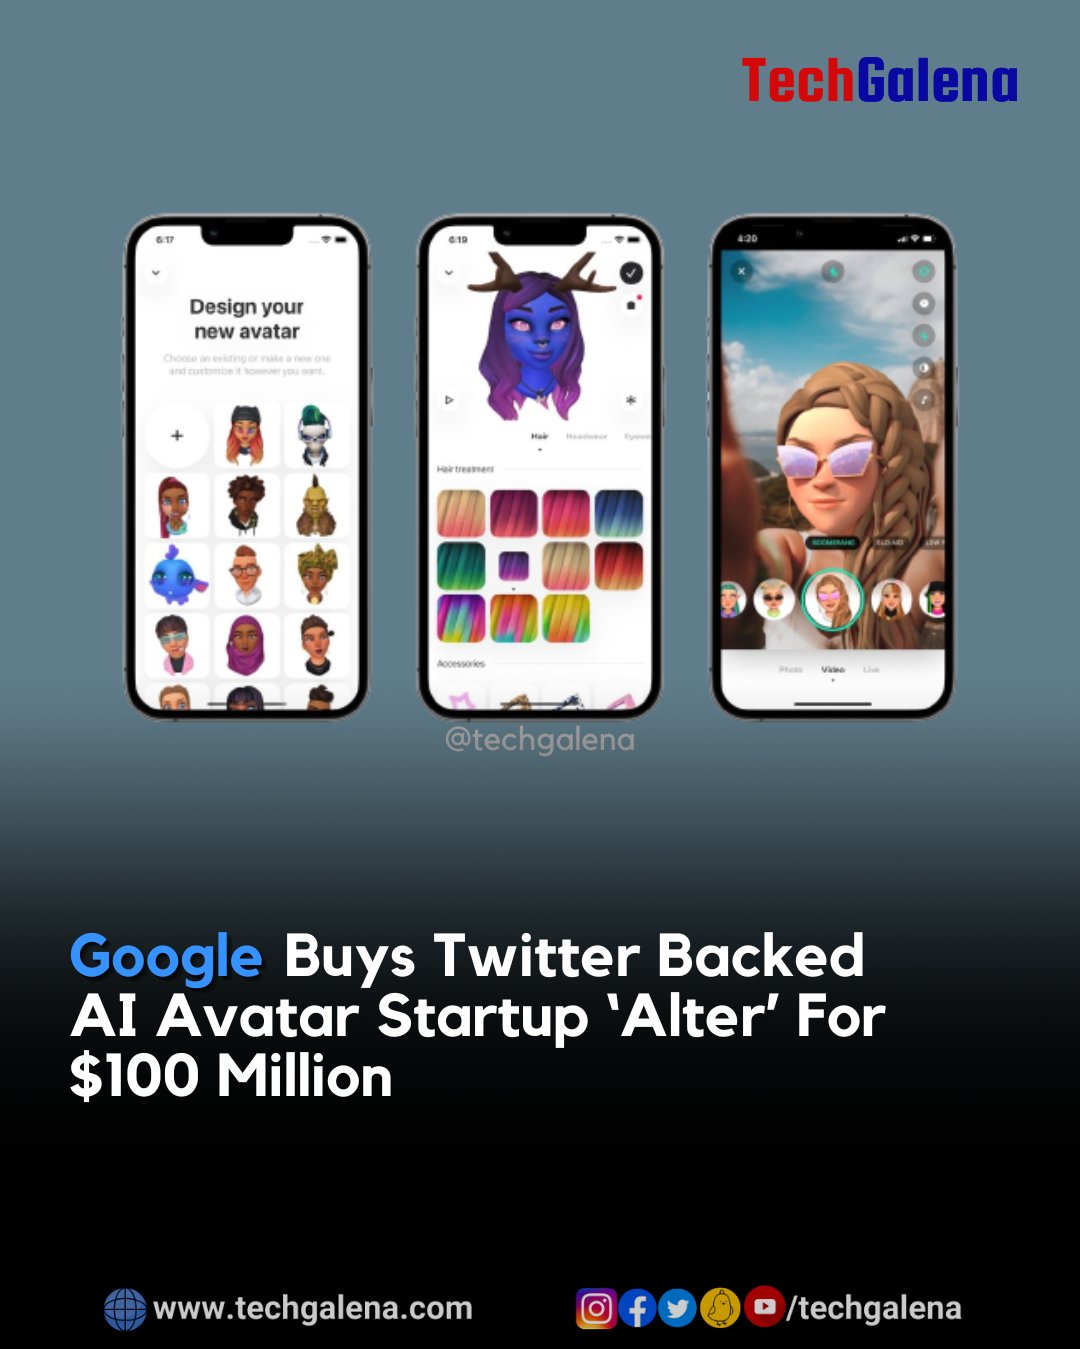 Google acquires Twitter-backed AI avatar startup Alter for $100 million